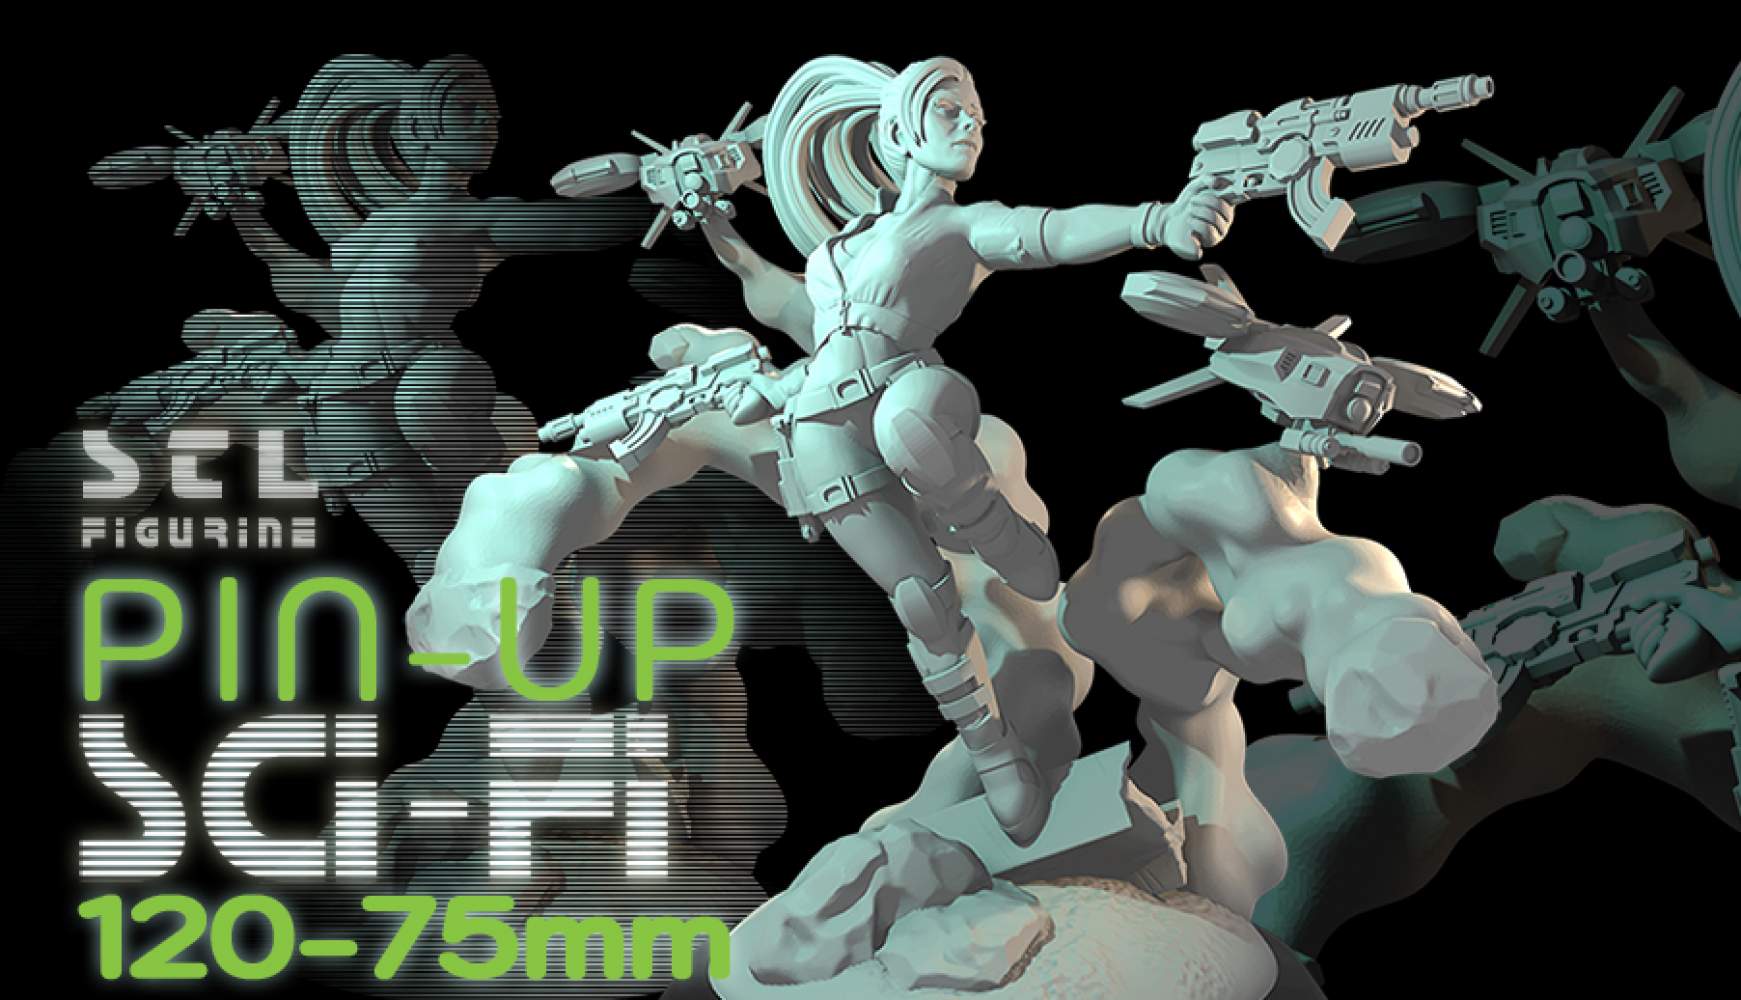 Gutsy Smash: The Space Opera Pin-Up Figurine. 120/75mm X2